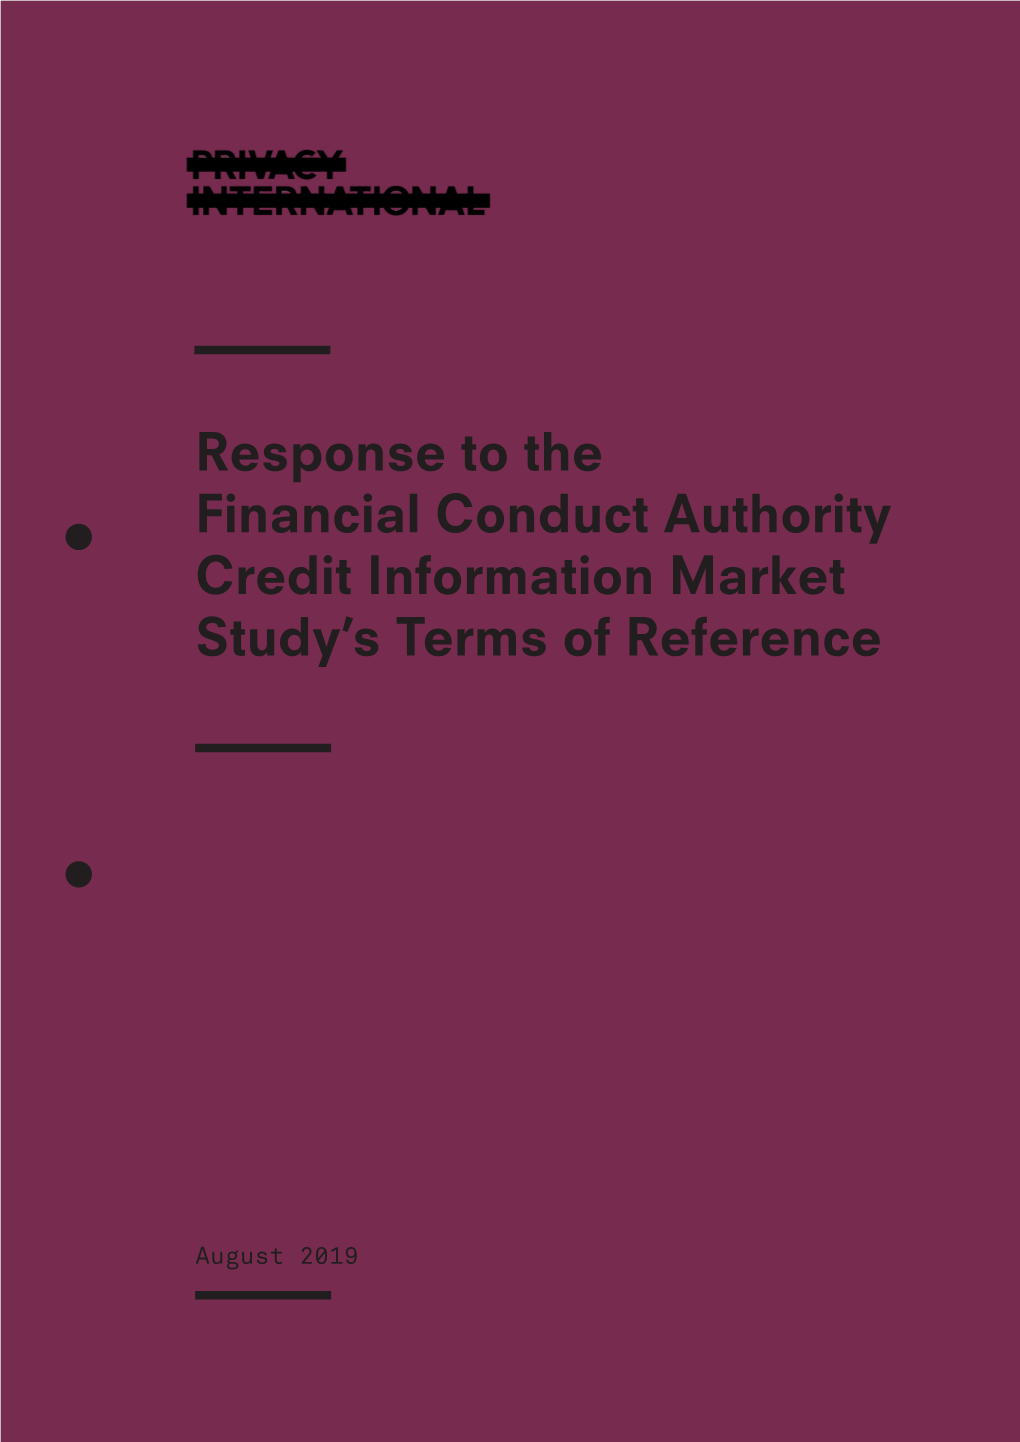 Response to the Financial Conduct Authority Credit Information Market Study’S Terms of Reference